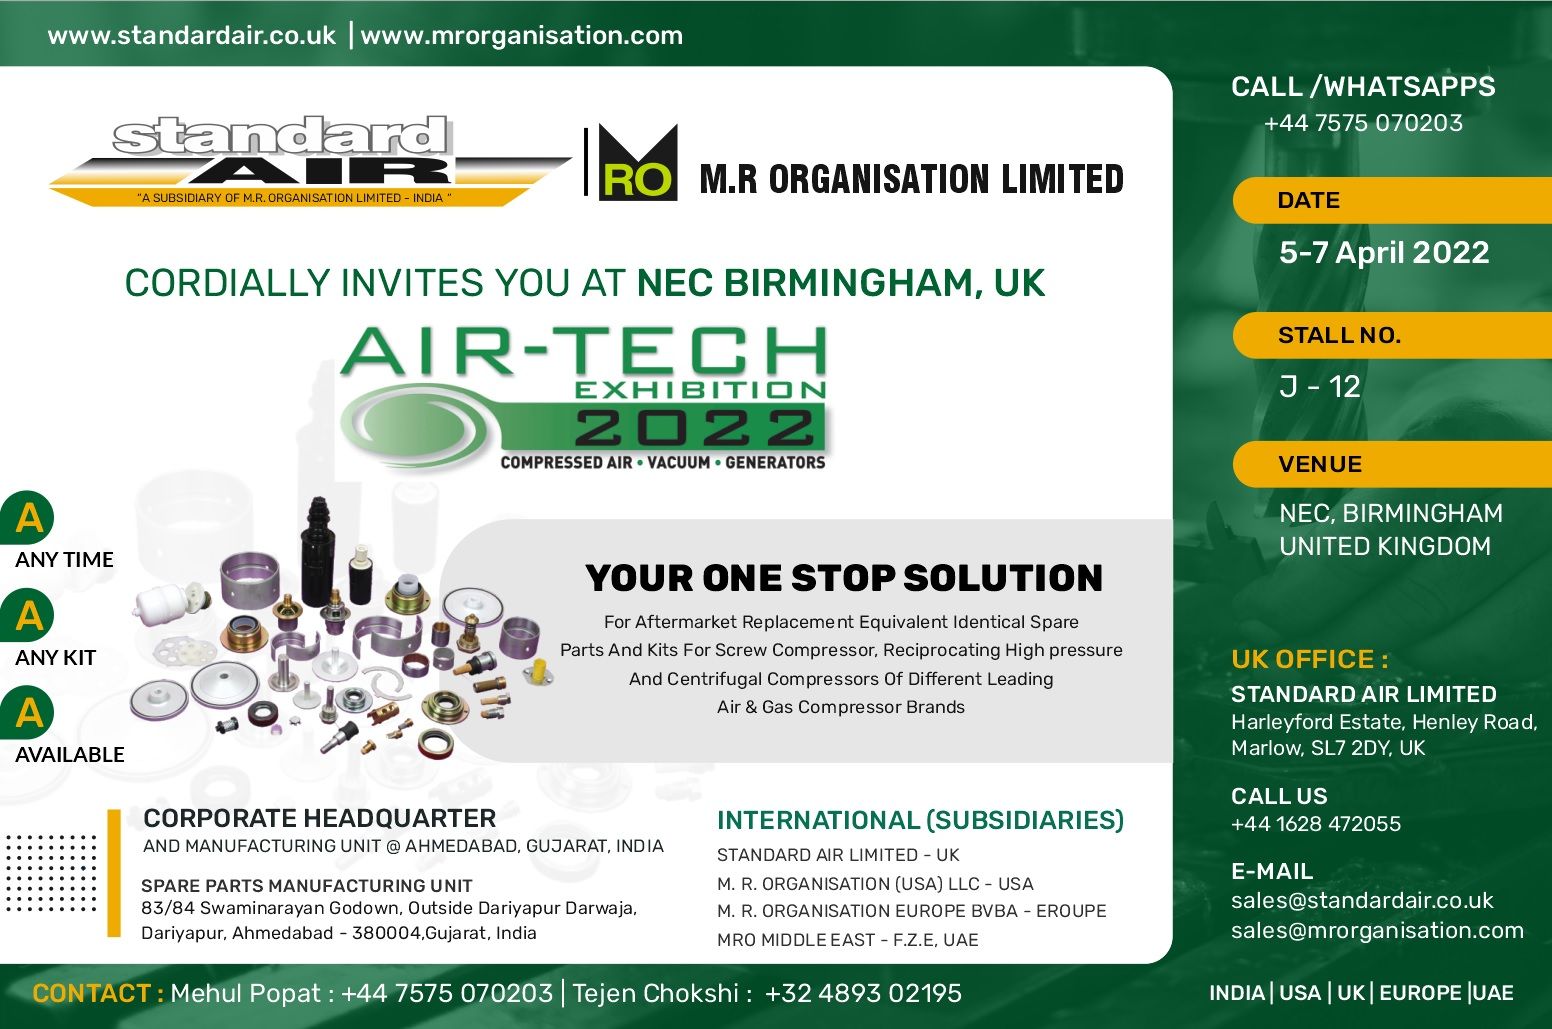 STANDARDAIR LIMITED AND M.R.ORGANISATION LIMITED